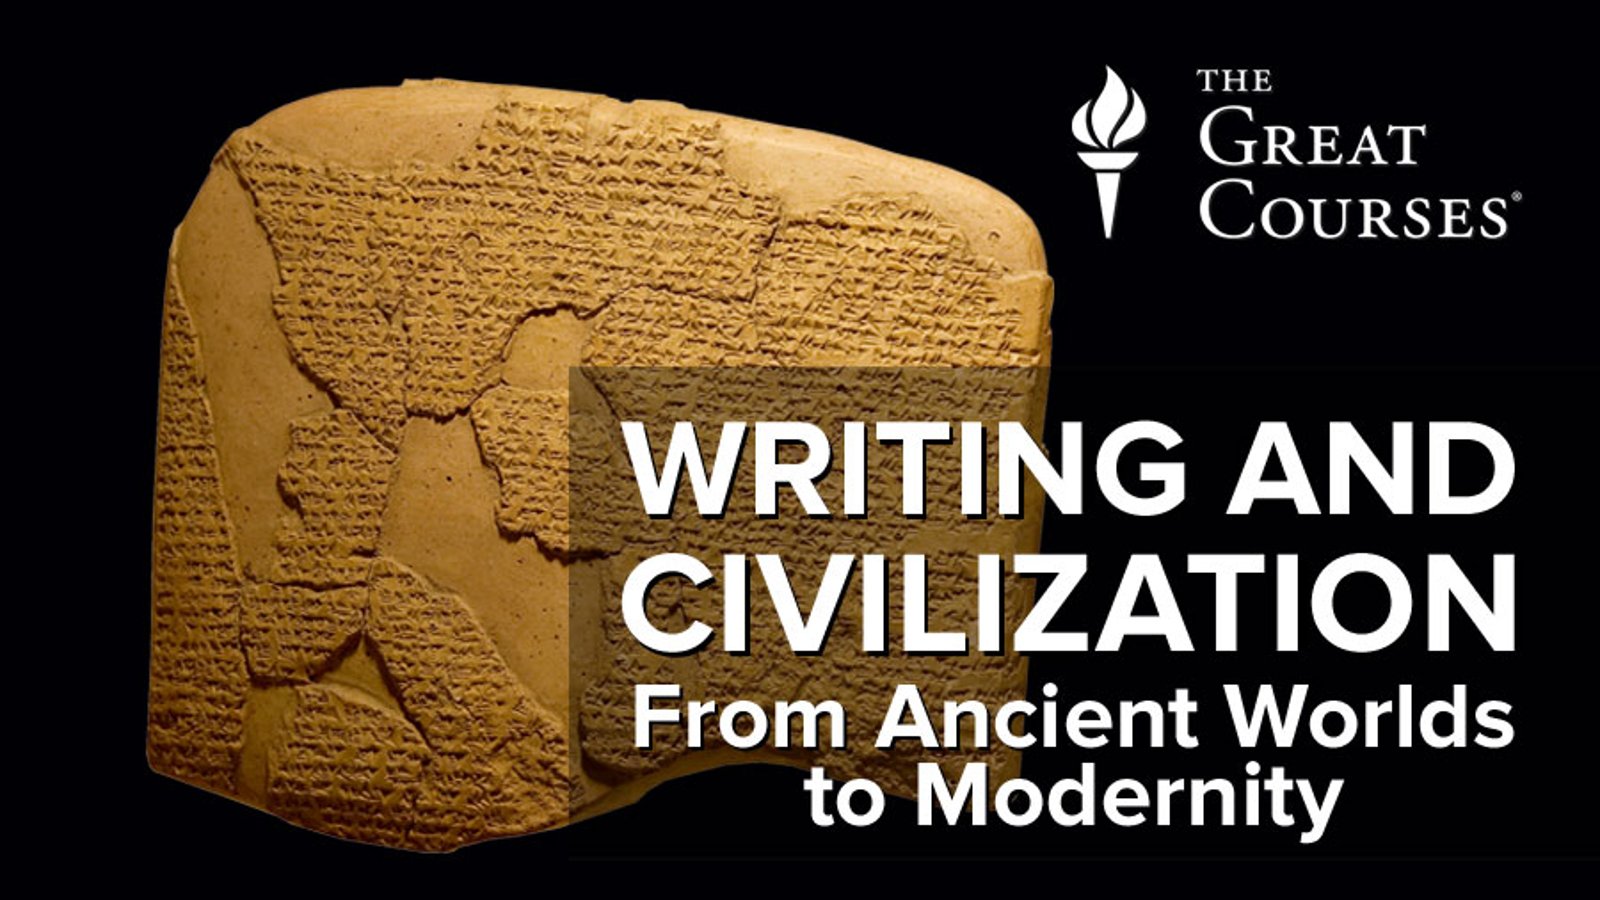 Writing and Civilization - From Ancient Worlds to Modernity